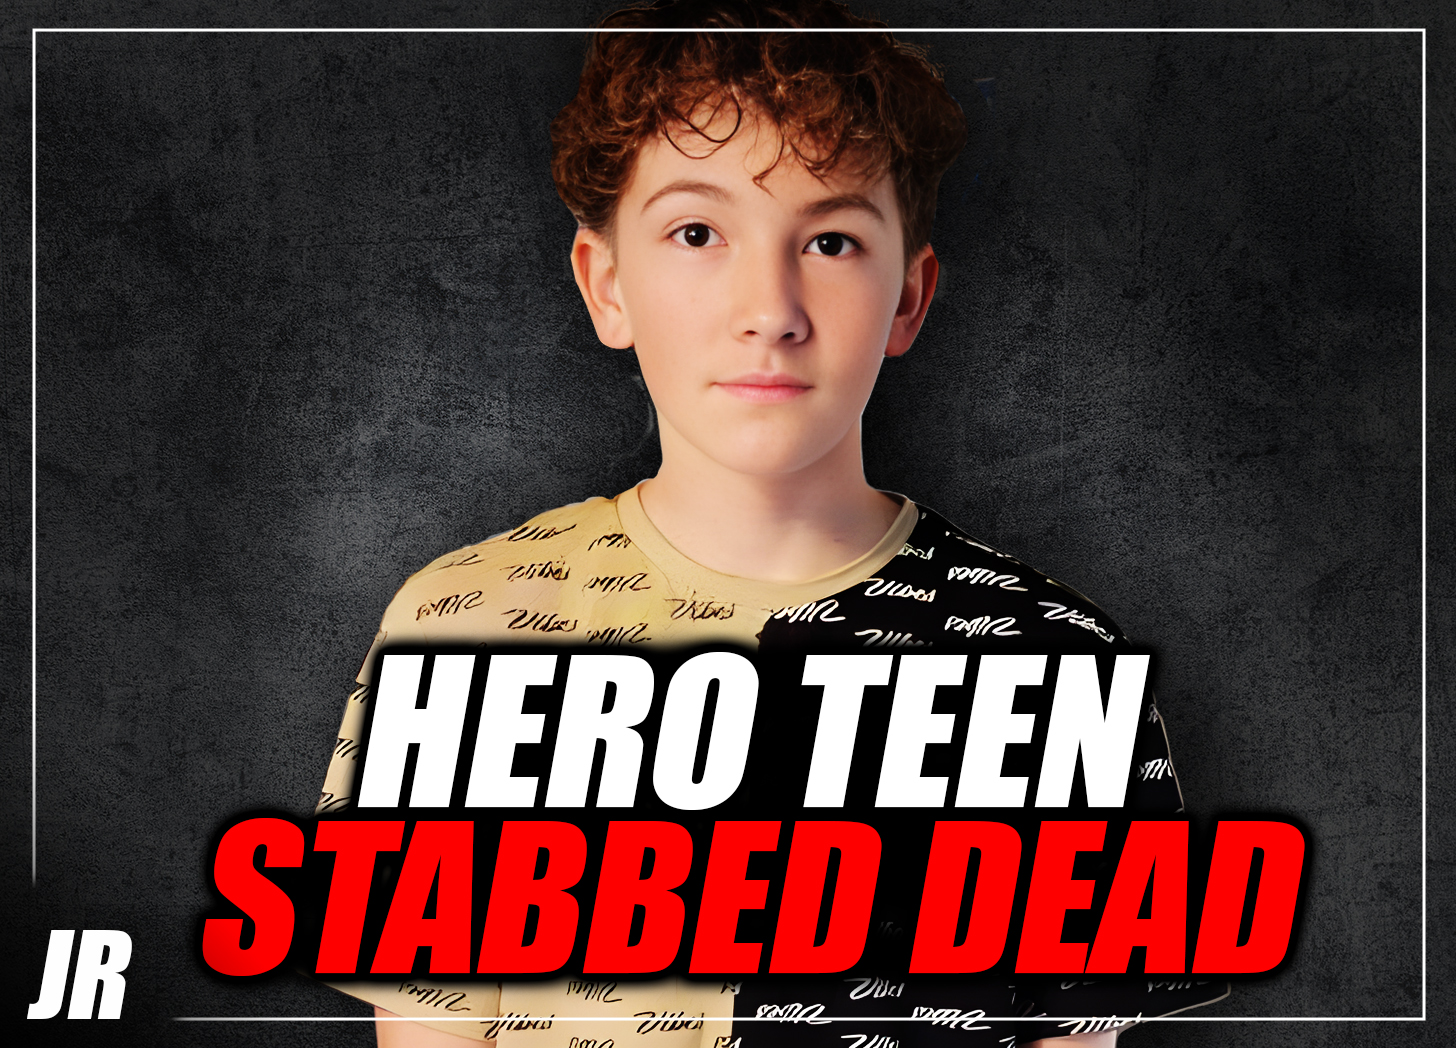 14-year-old stabbed by young ‘freaks’ hailed as hero for saving girlfriend